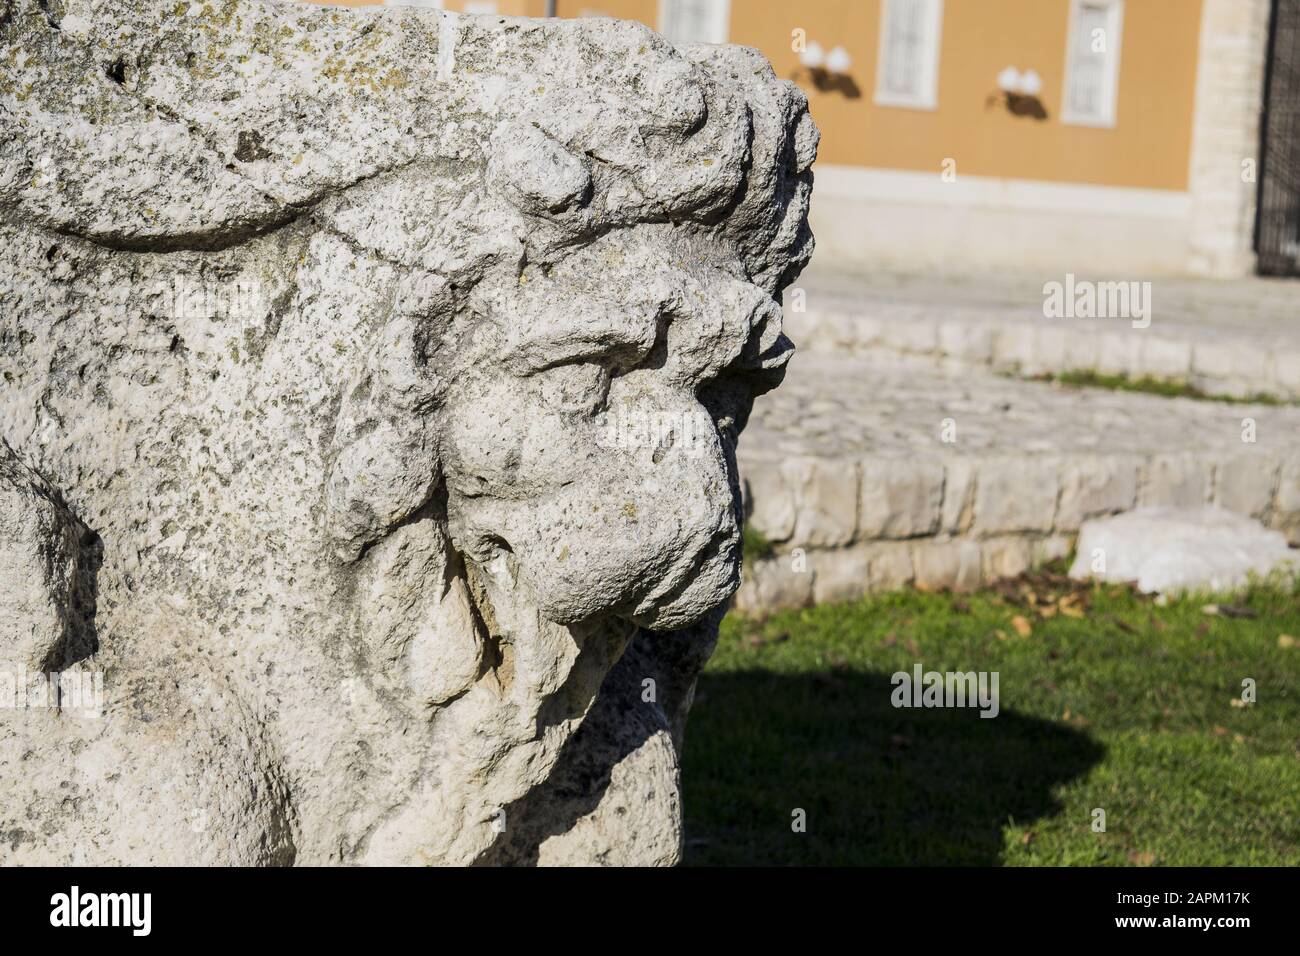 Closeup shot of an old sculpture of an animal head on a sunny day Stock Photo